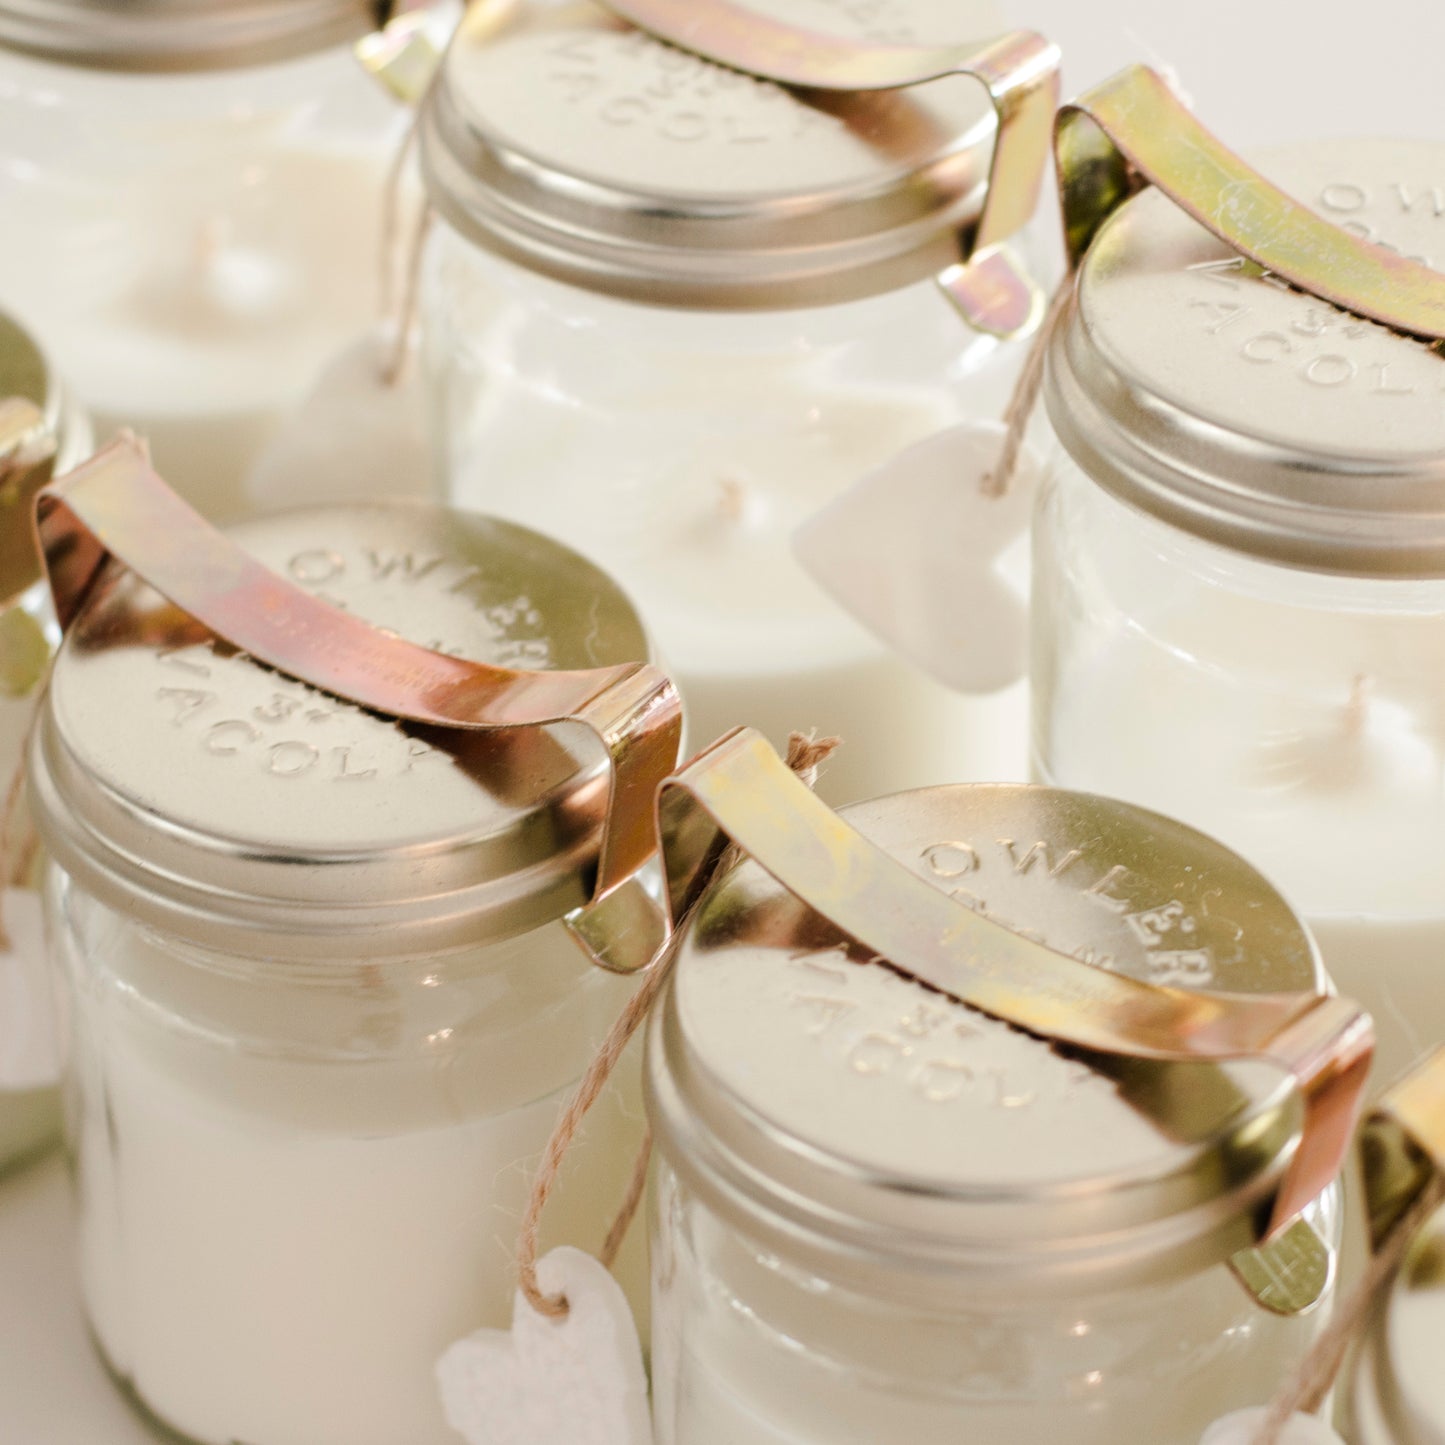 Australian Vintage Jar Collection - Scented Soy Candles